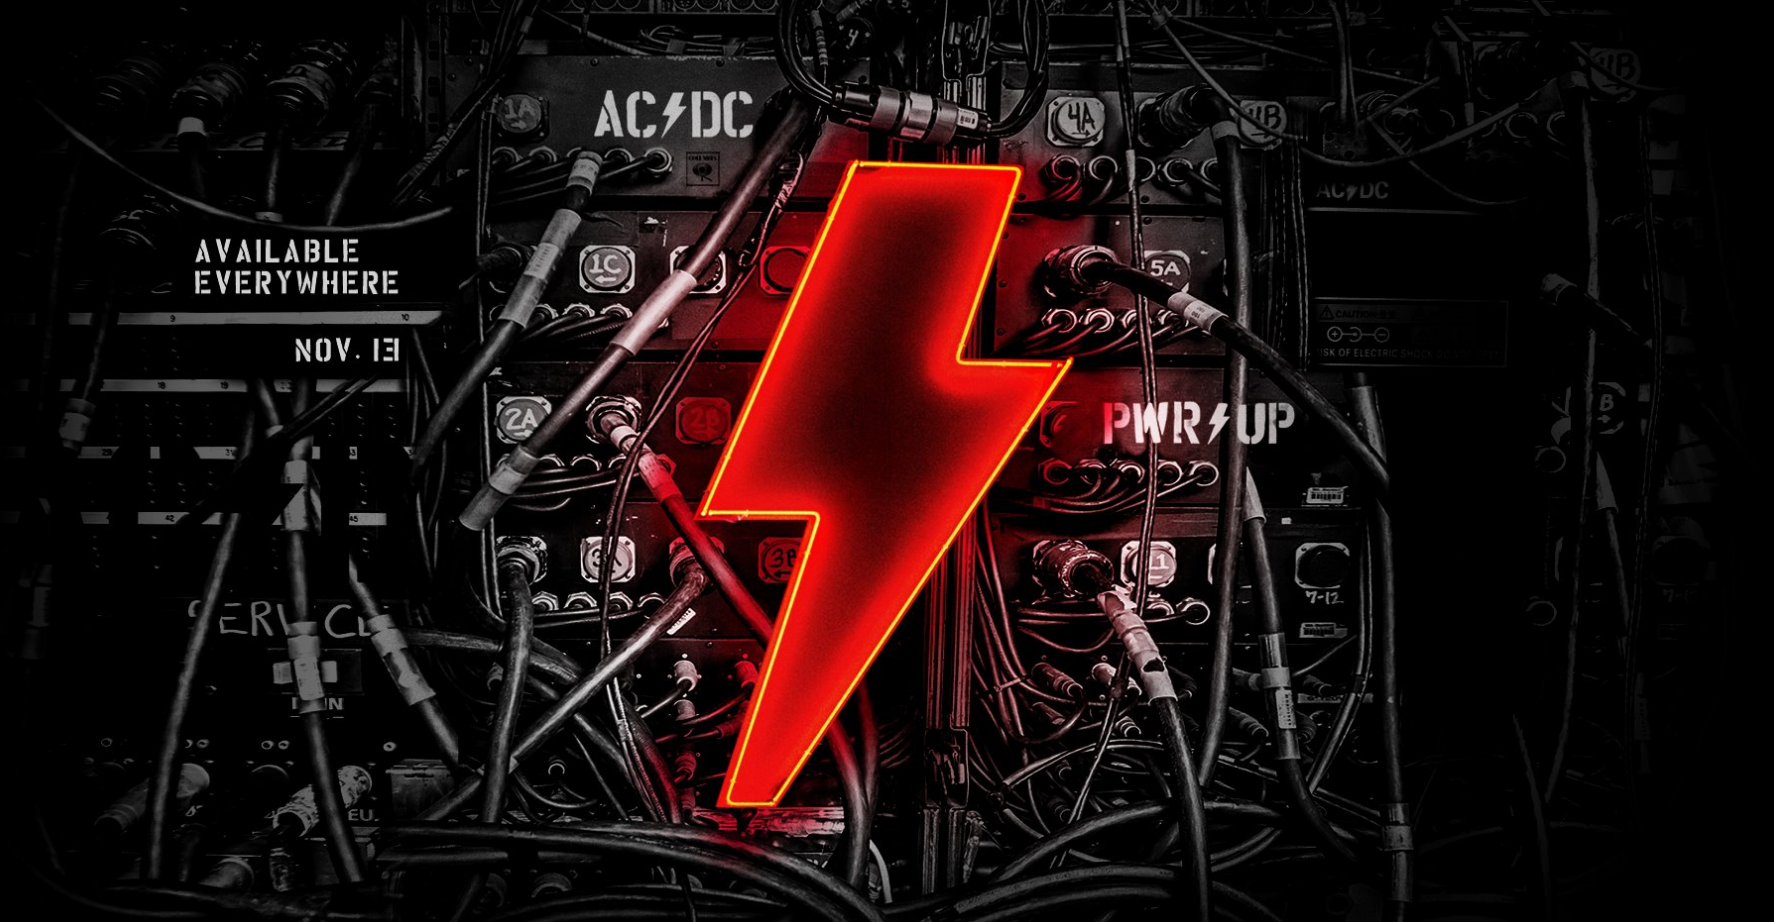 Ac Dc Announce New Album Power Up Featuring Classic Lineup Share Single Shot In The Dark